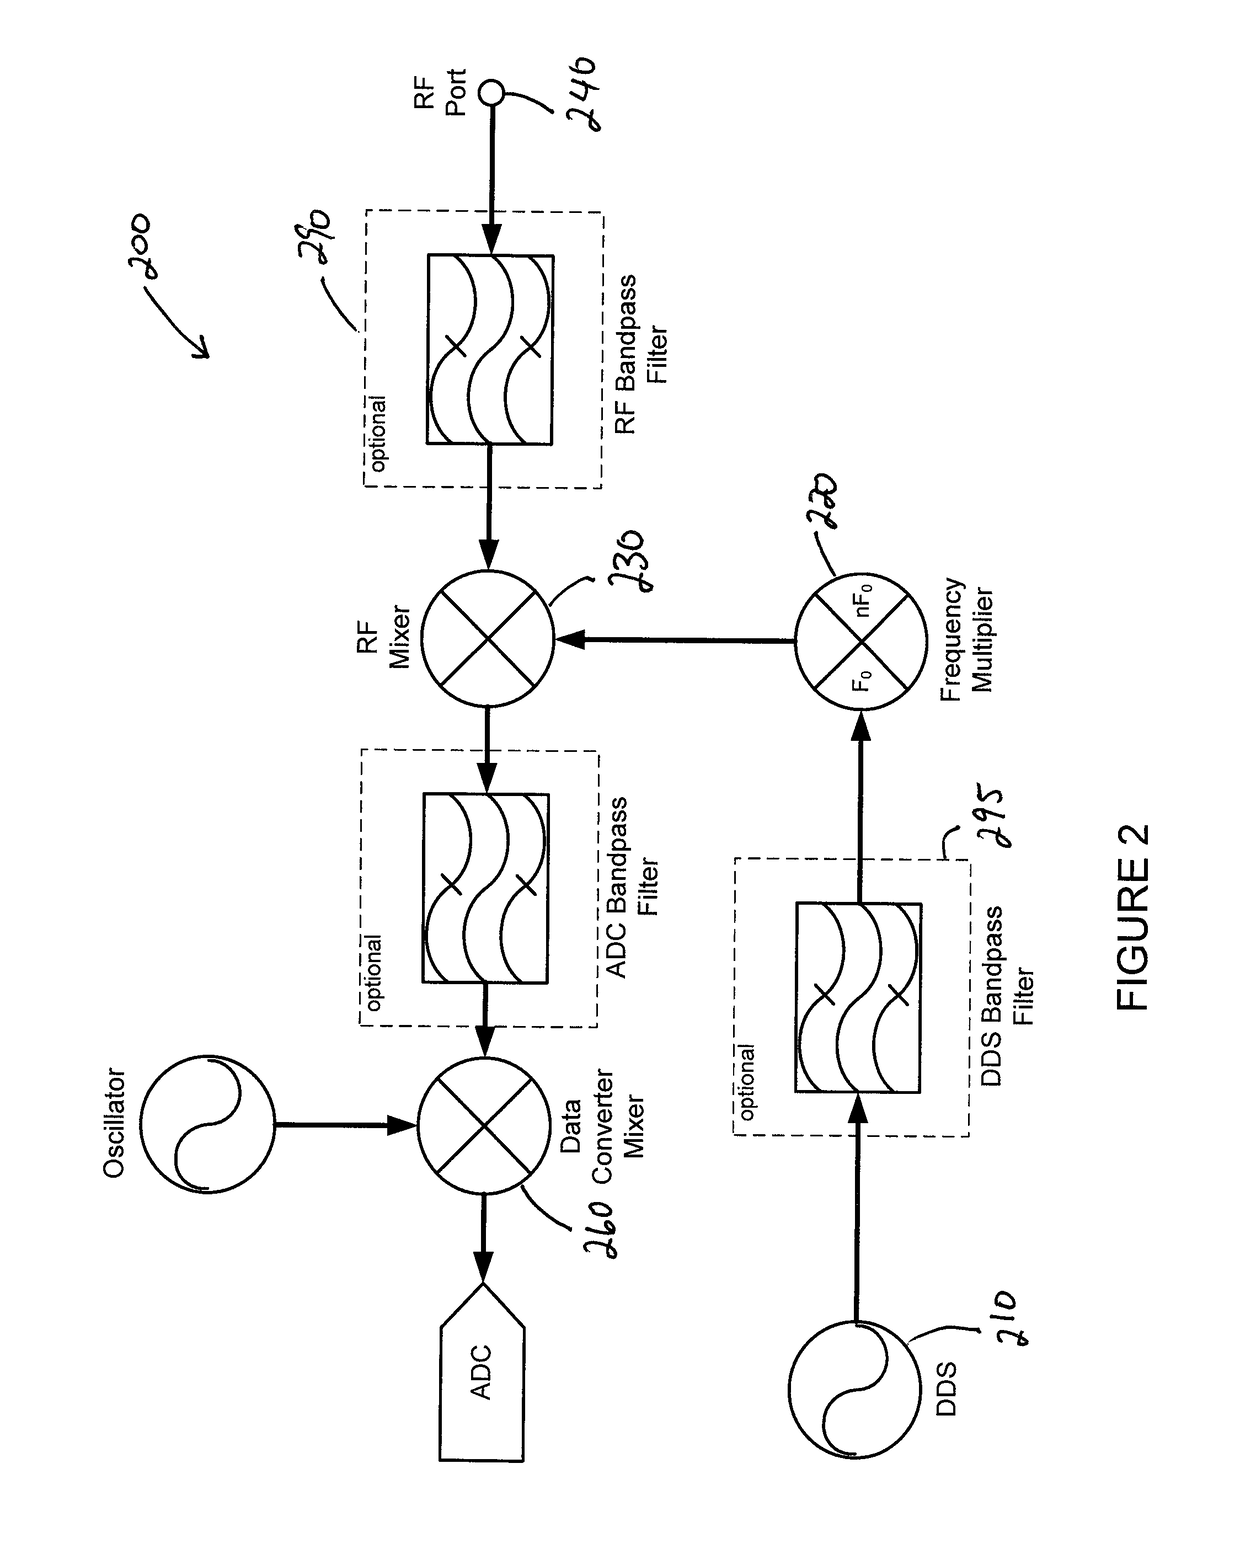 System and method for ultra wideband radio frequency scanning and signal generation